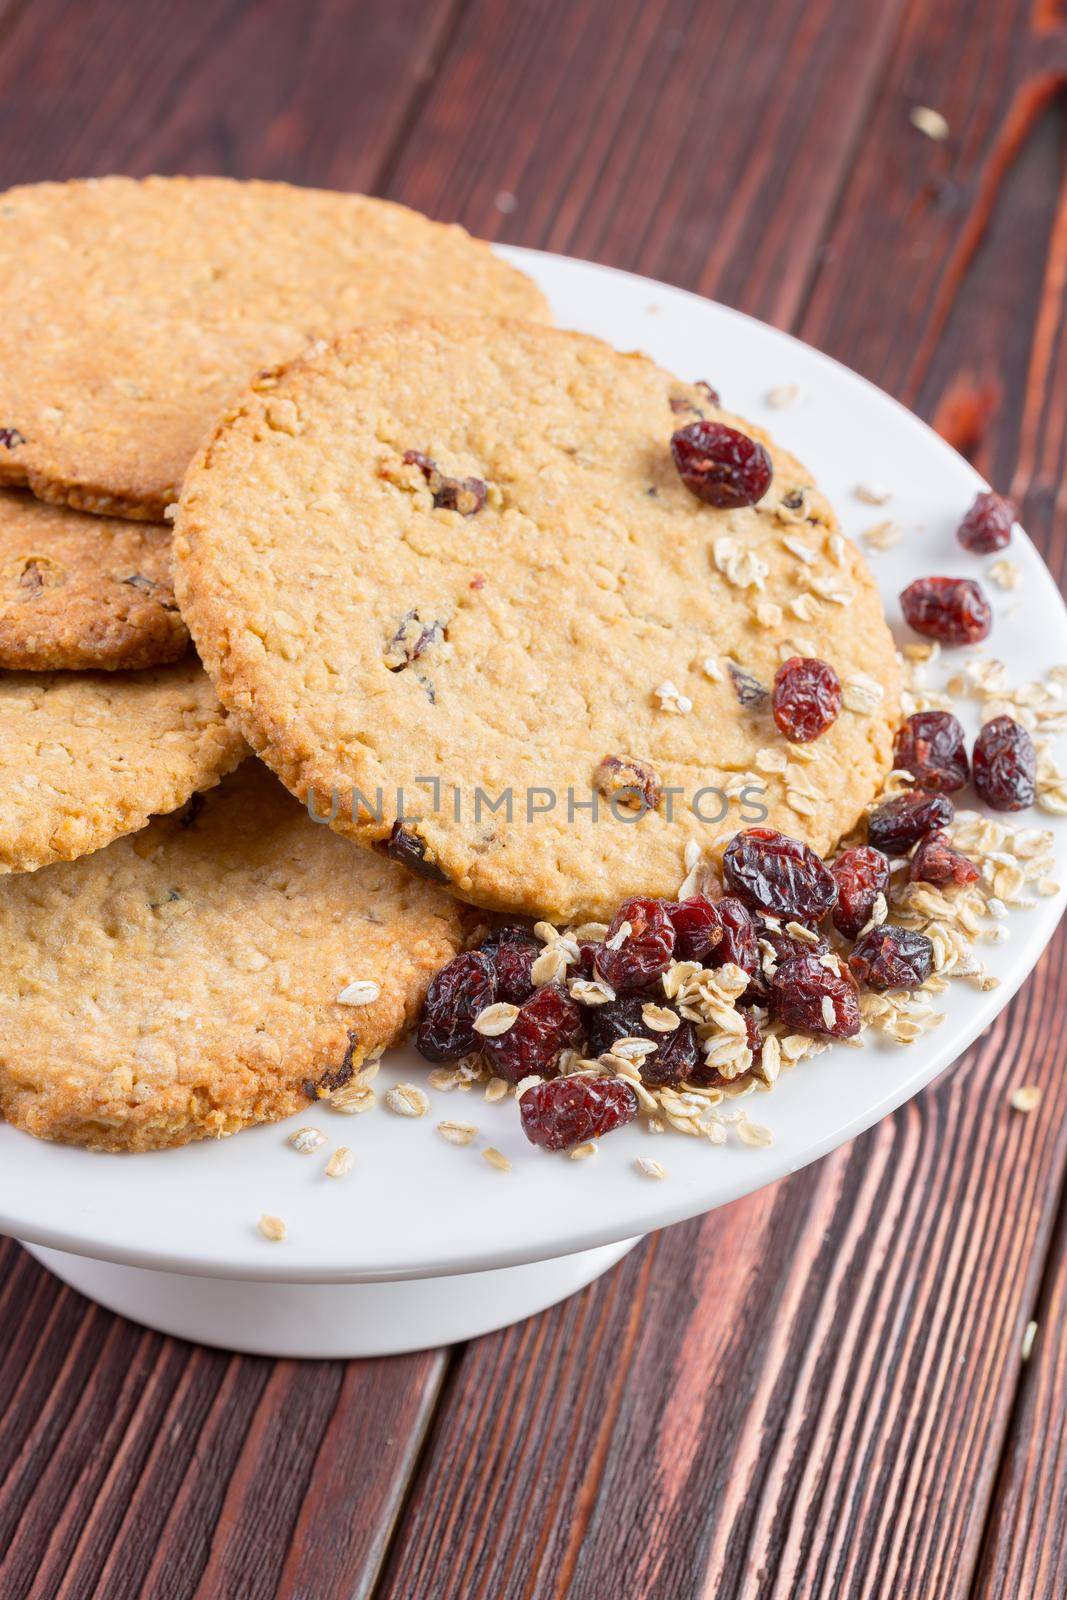 Oat cookies served on dark wooden table close up